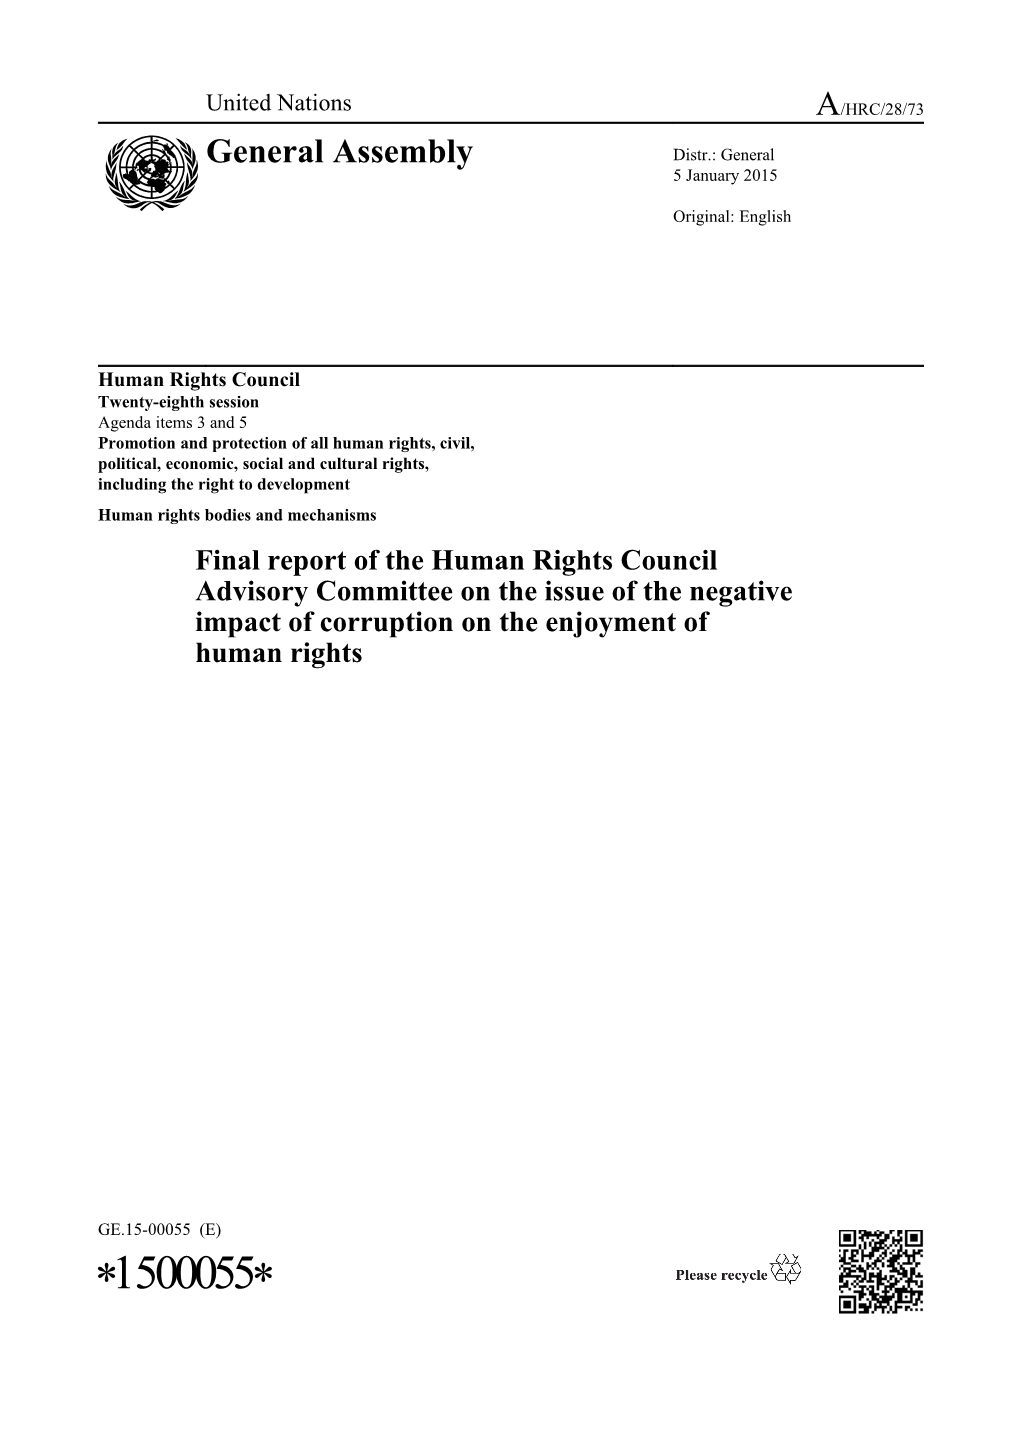 Final Report of the Human Rights Council Advisory Committee in English